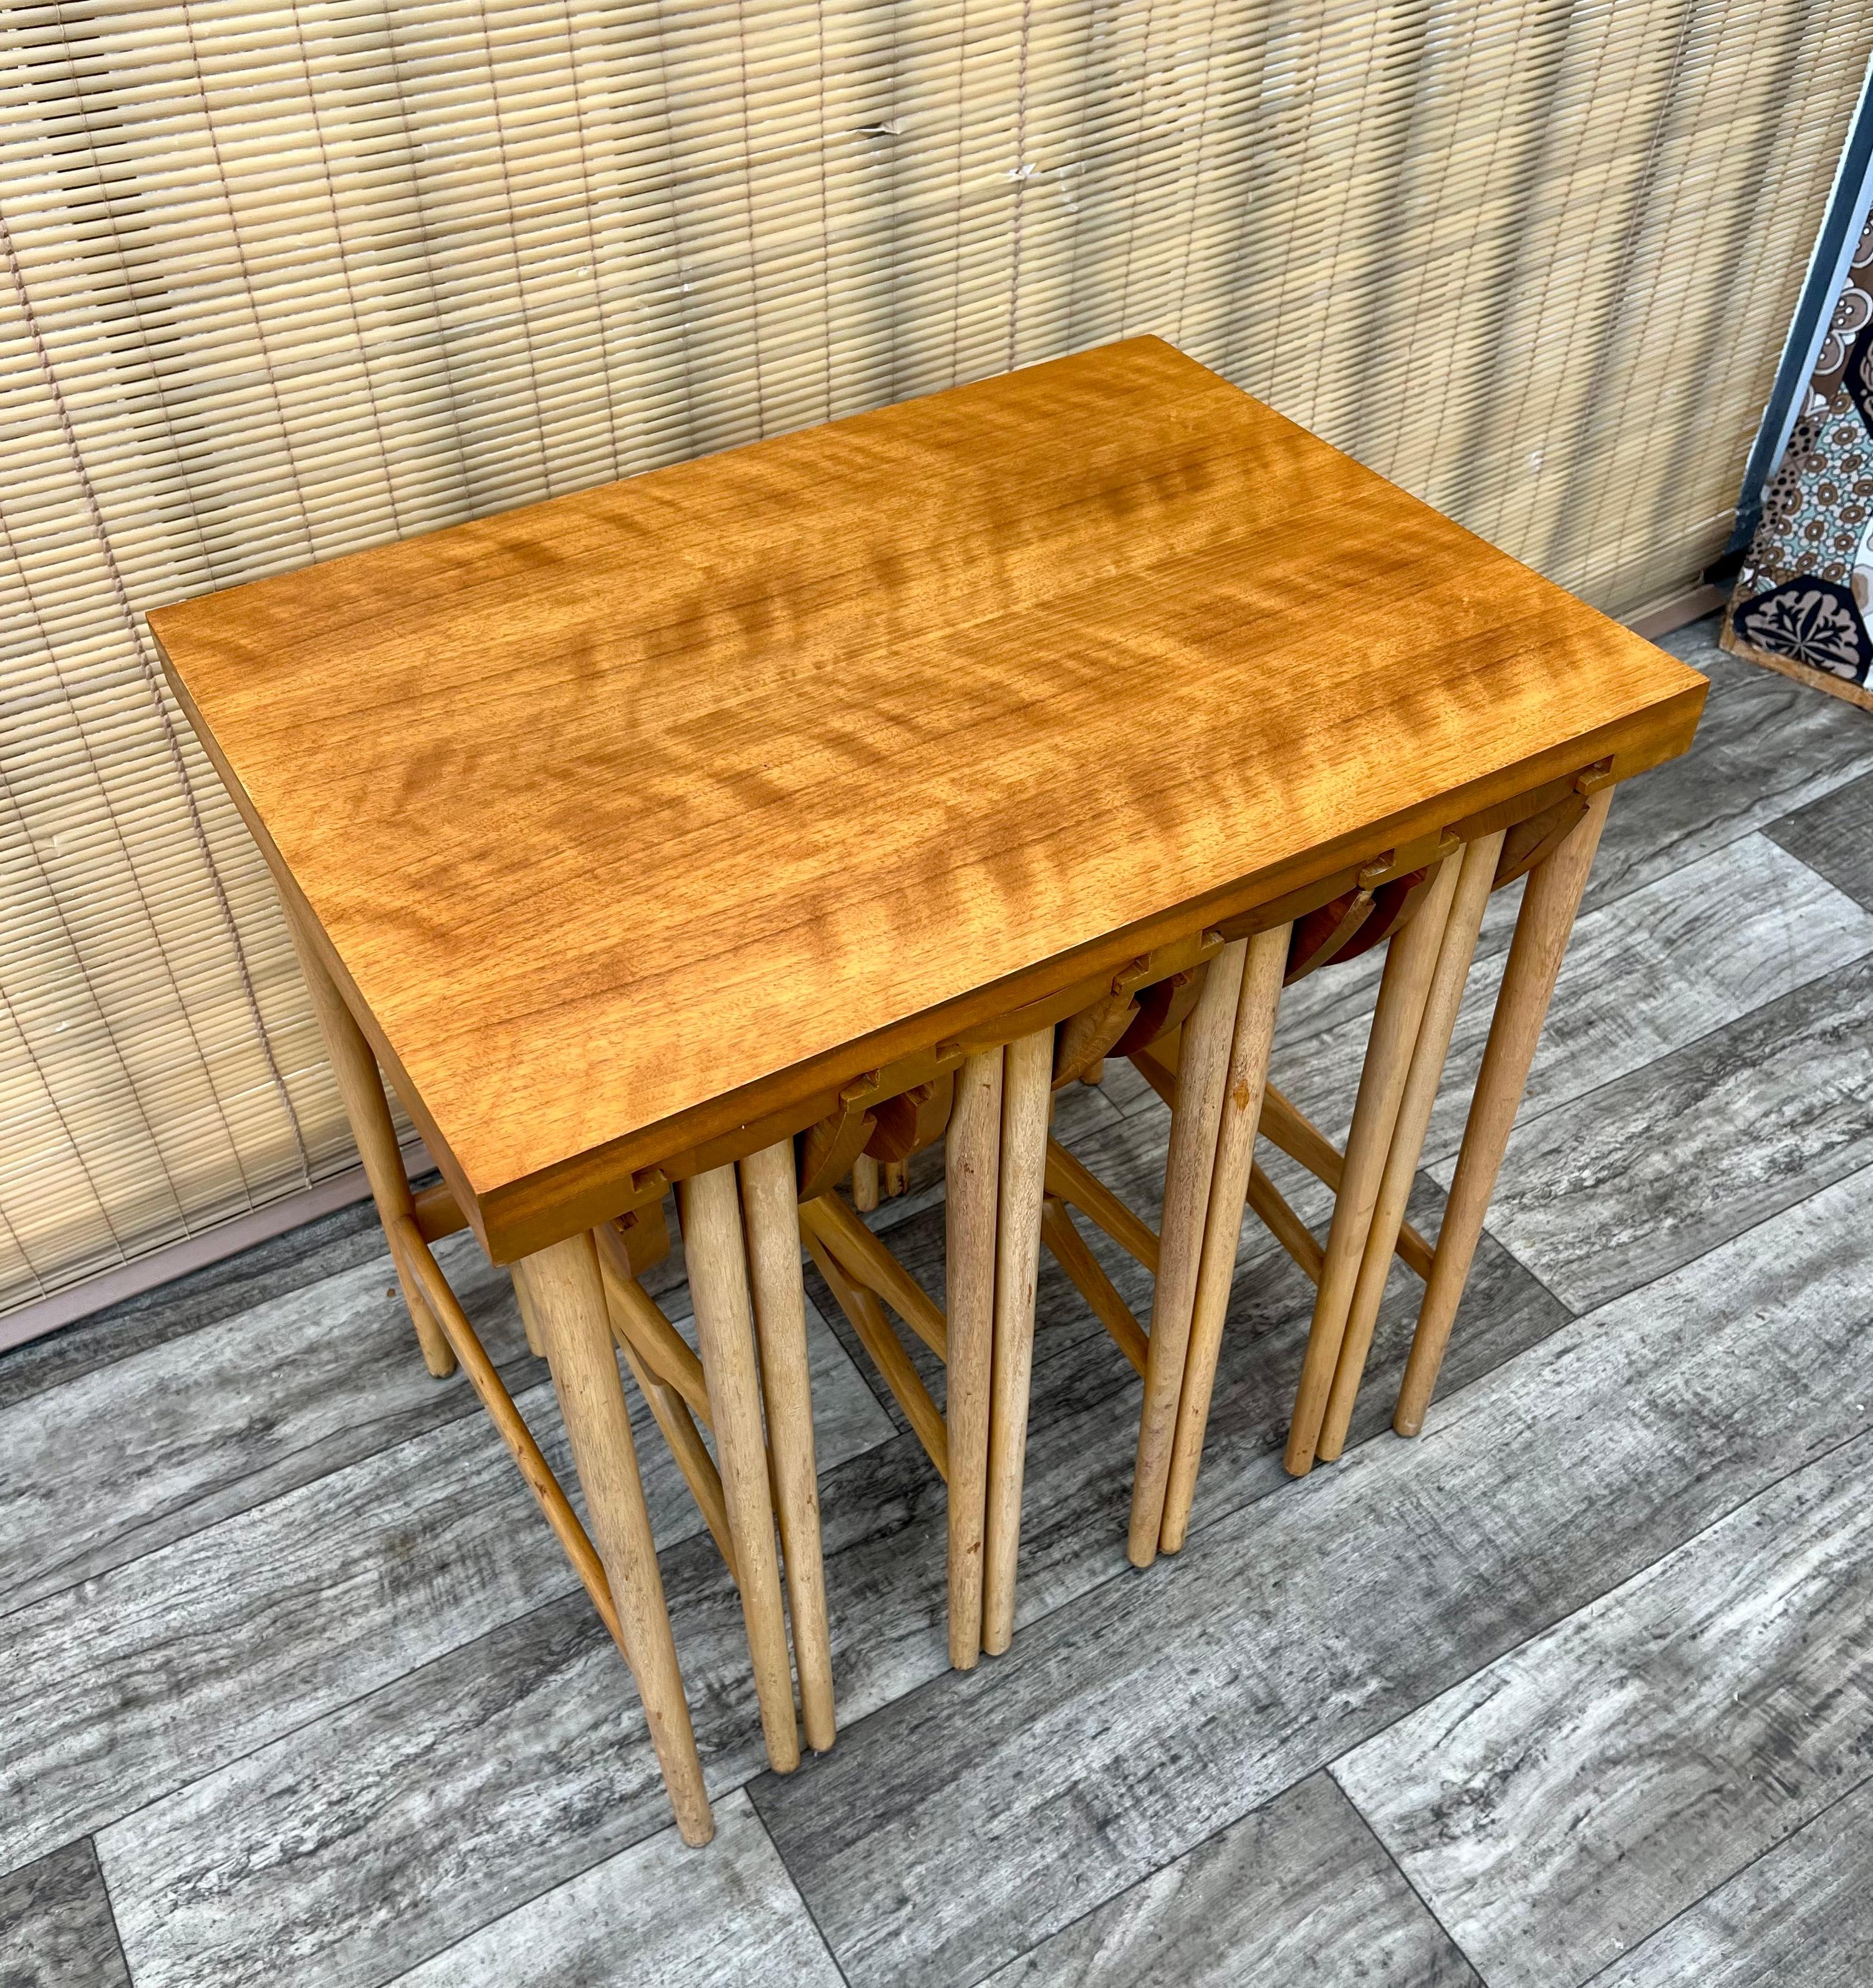 Vintage Mid Century Modern Nesting Tables by Bertha Schaefer for Singer and Sons. Circa 1950s
Feature a set of 4 round folding tables that slide underneath a rectangular side table with a quintessential sleek Mid Century Modern Design. 
I good